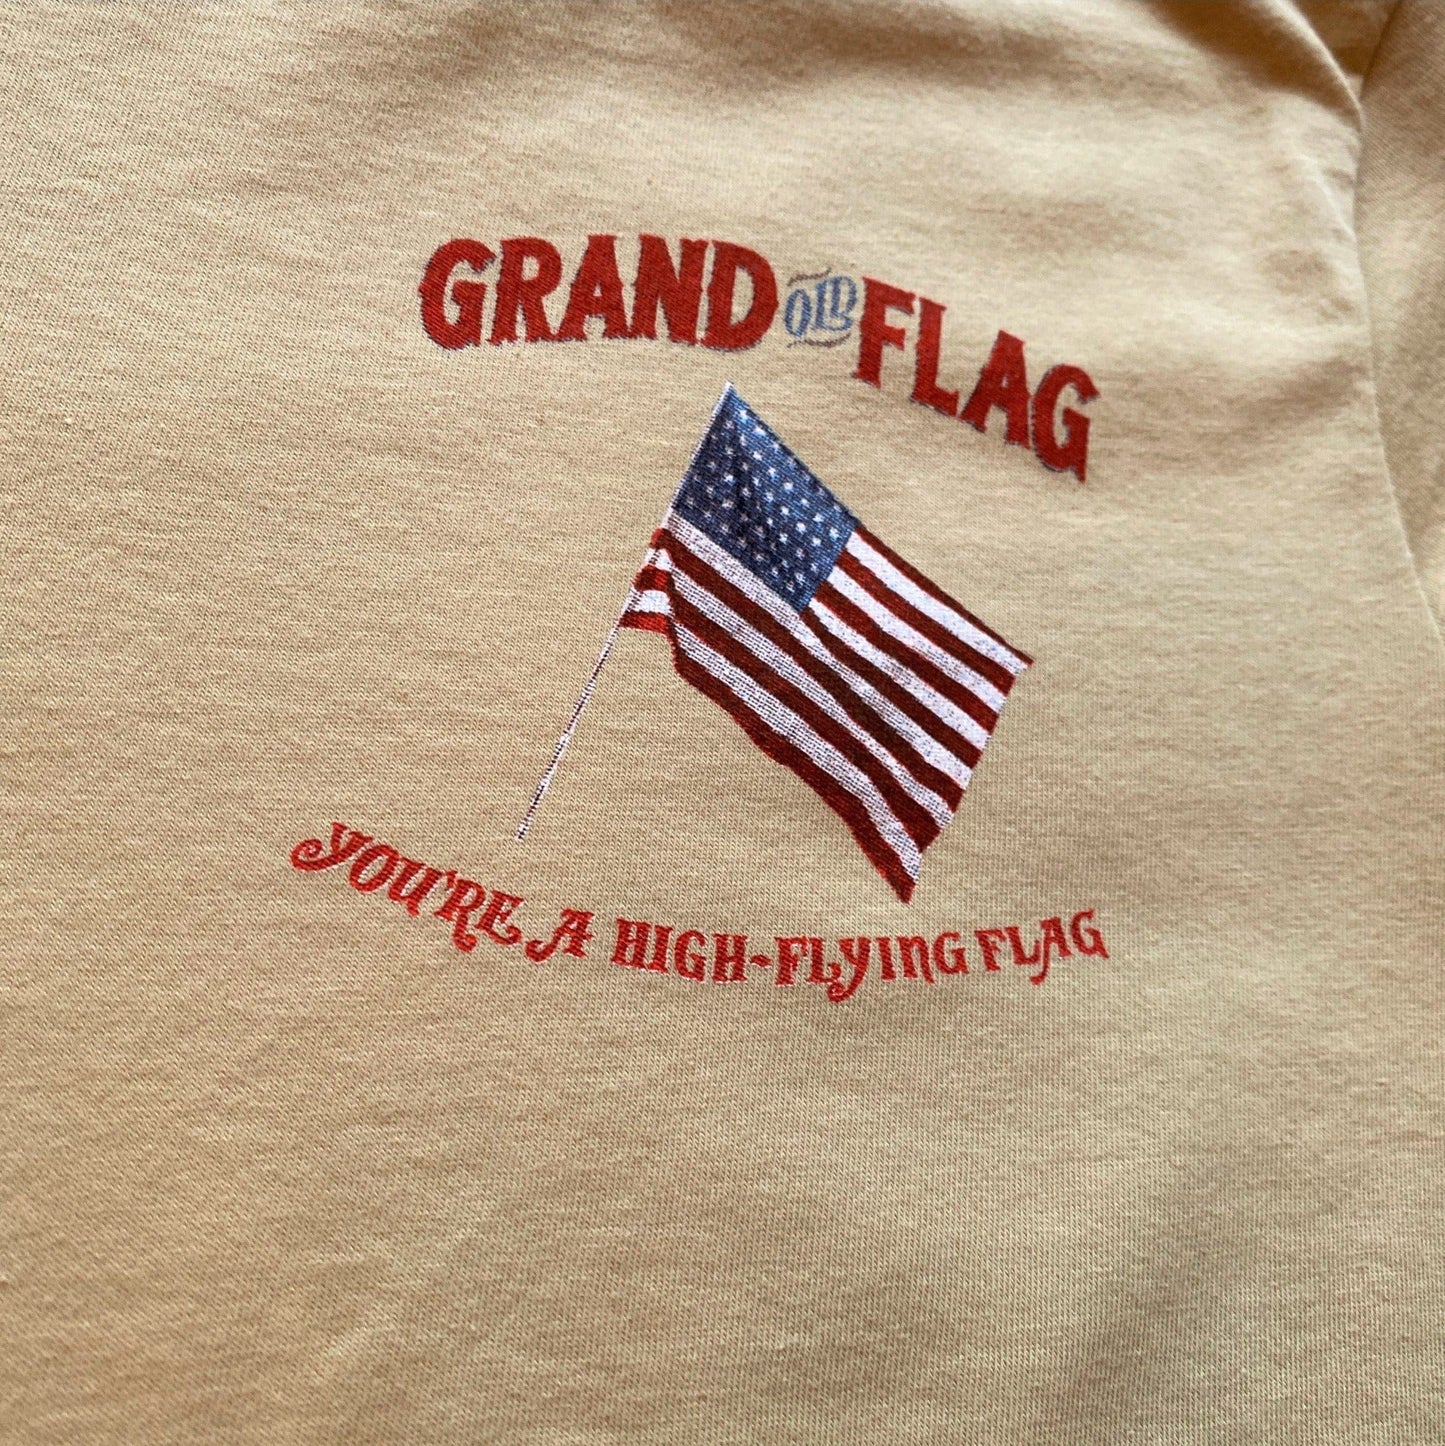 Closeup "Grand Old Flag" Shirt Sand color front flag design from the history list store